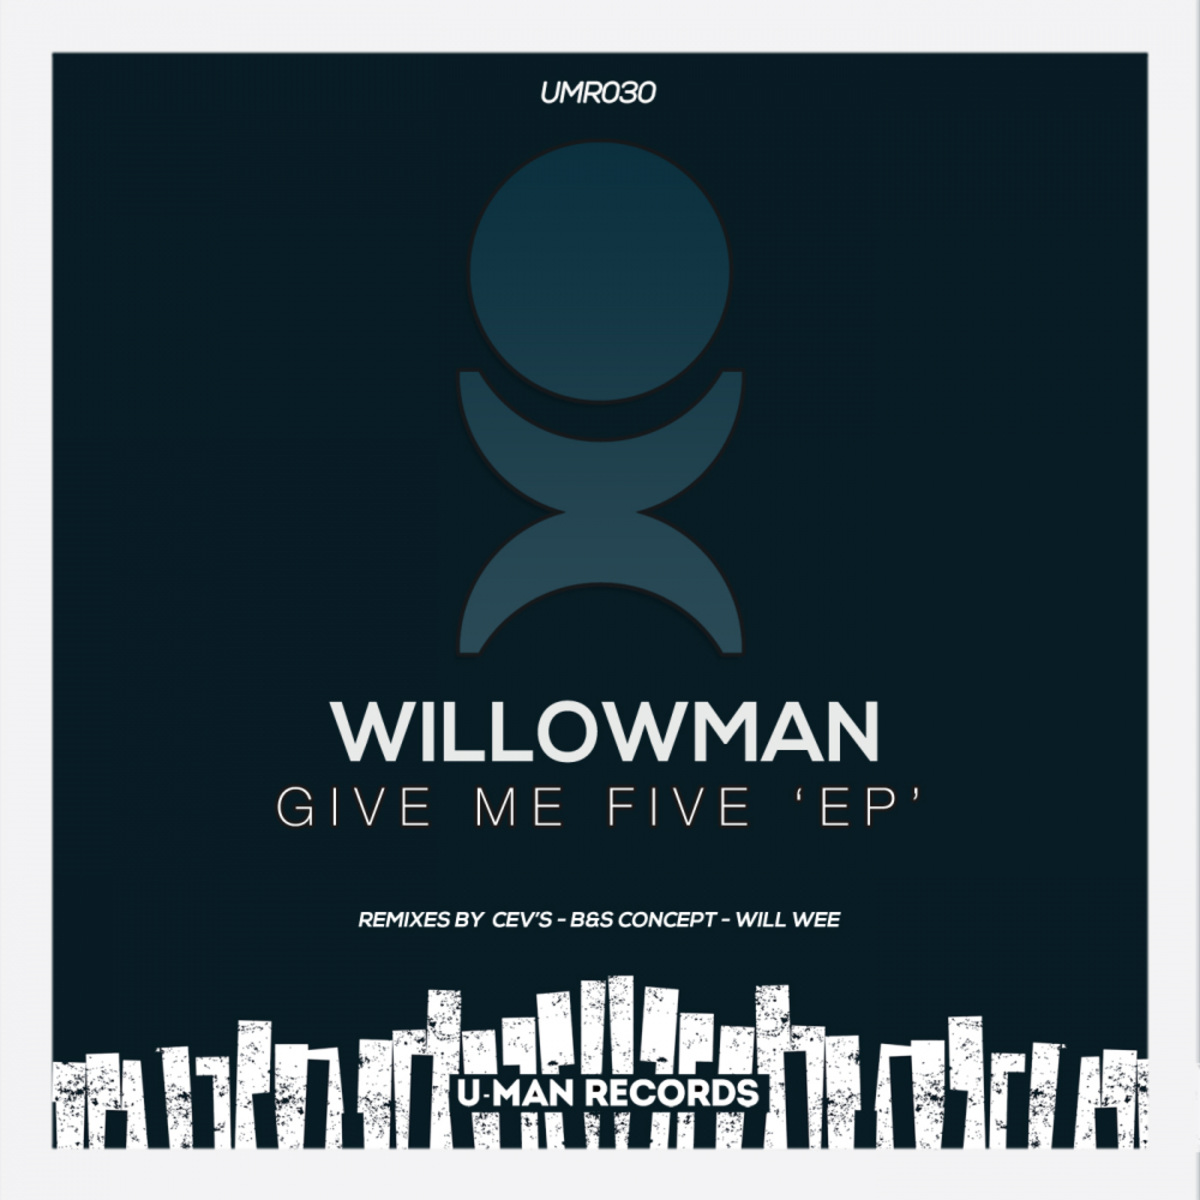 WillowMan - Give Me Five / U-Man Records